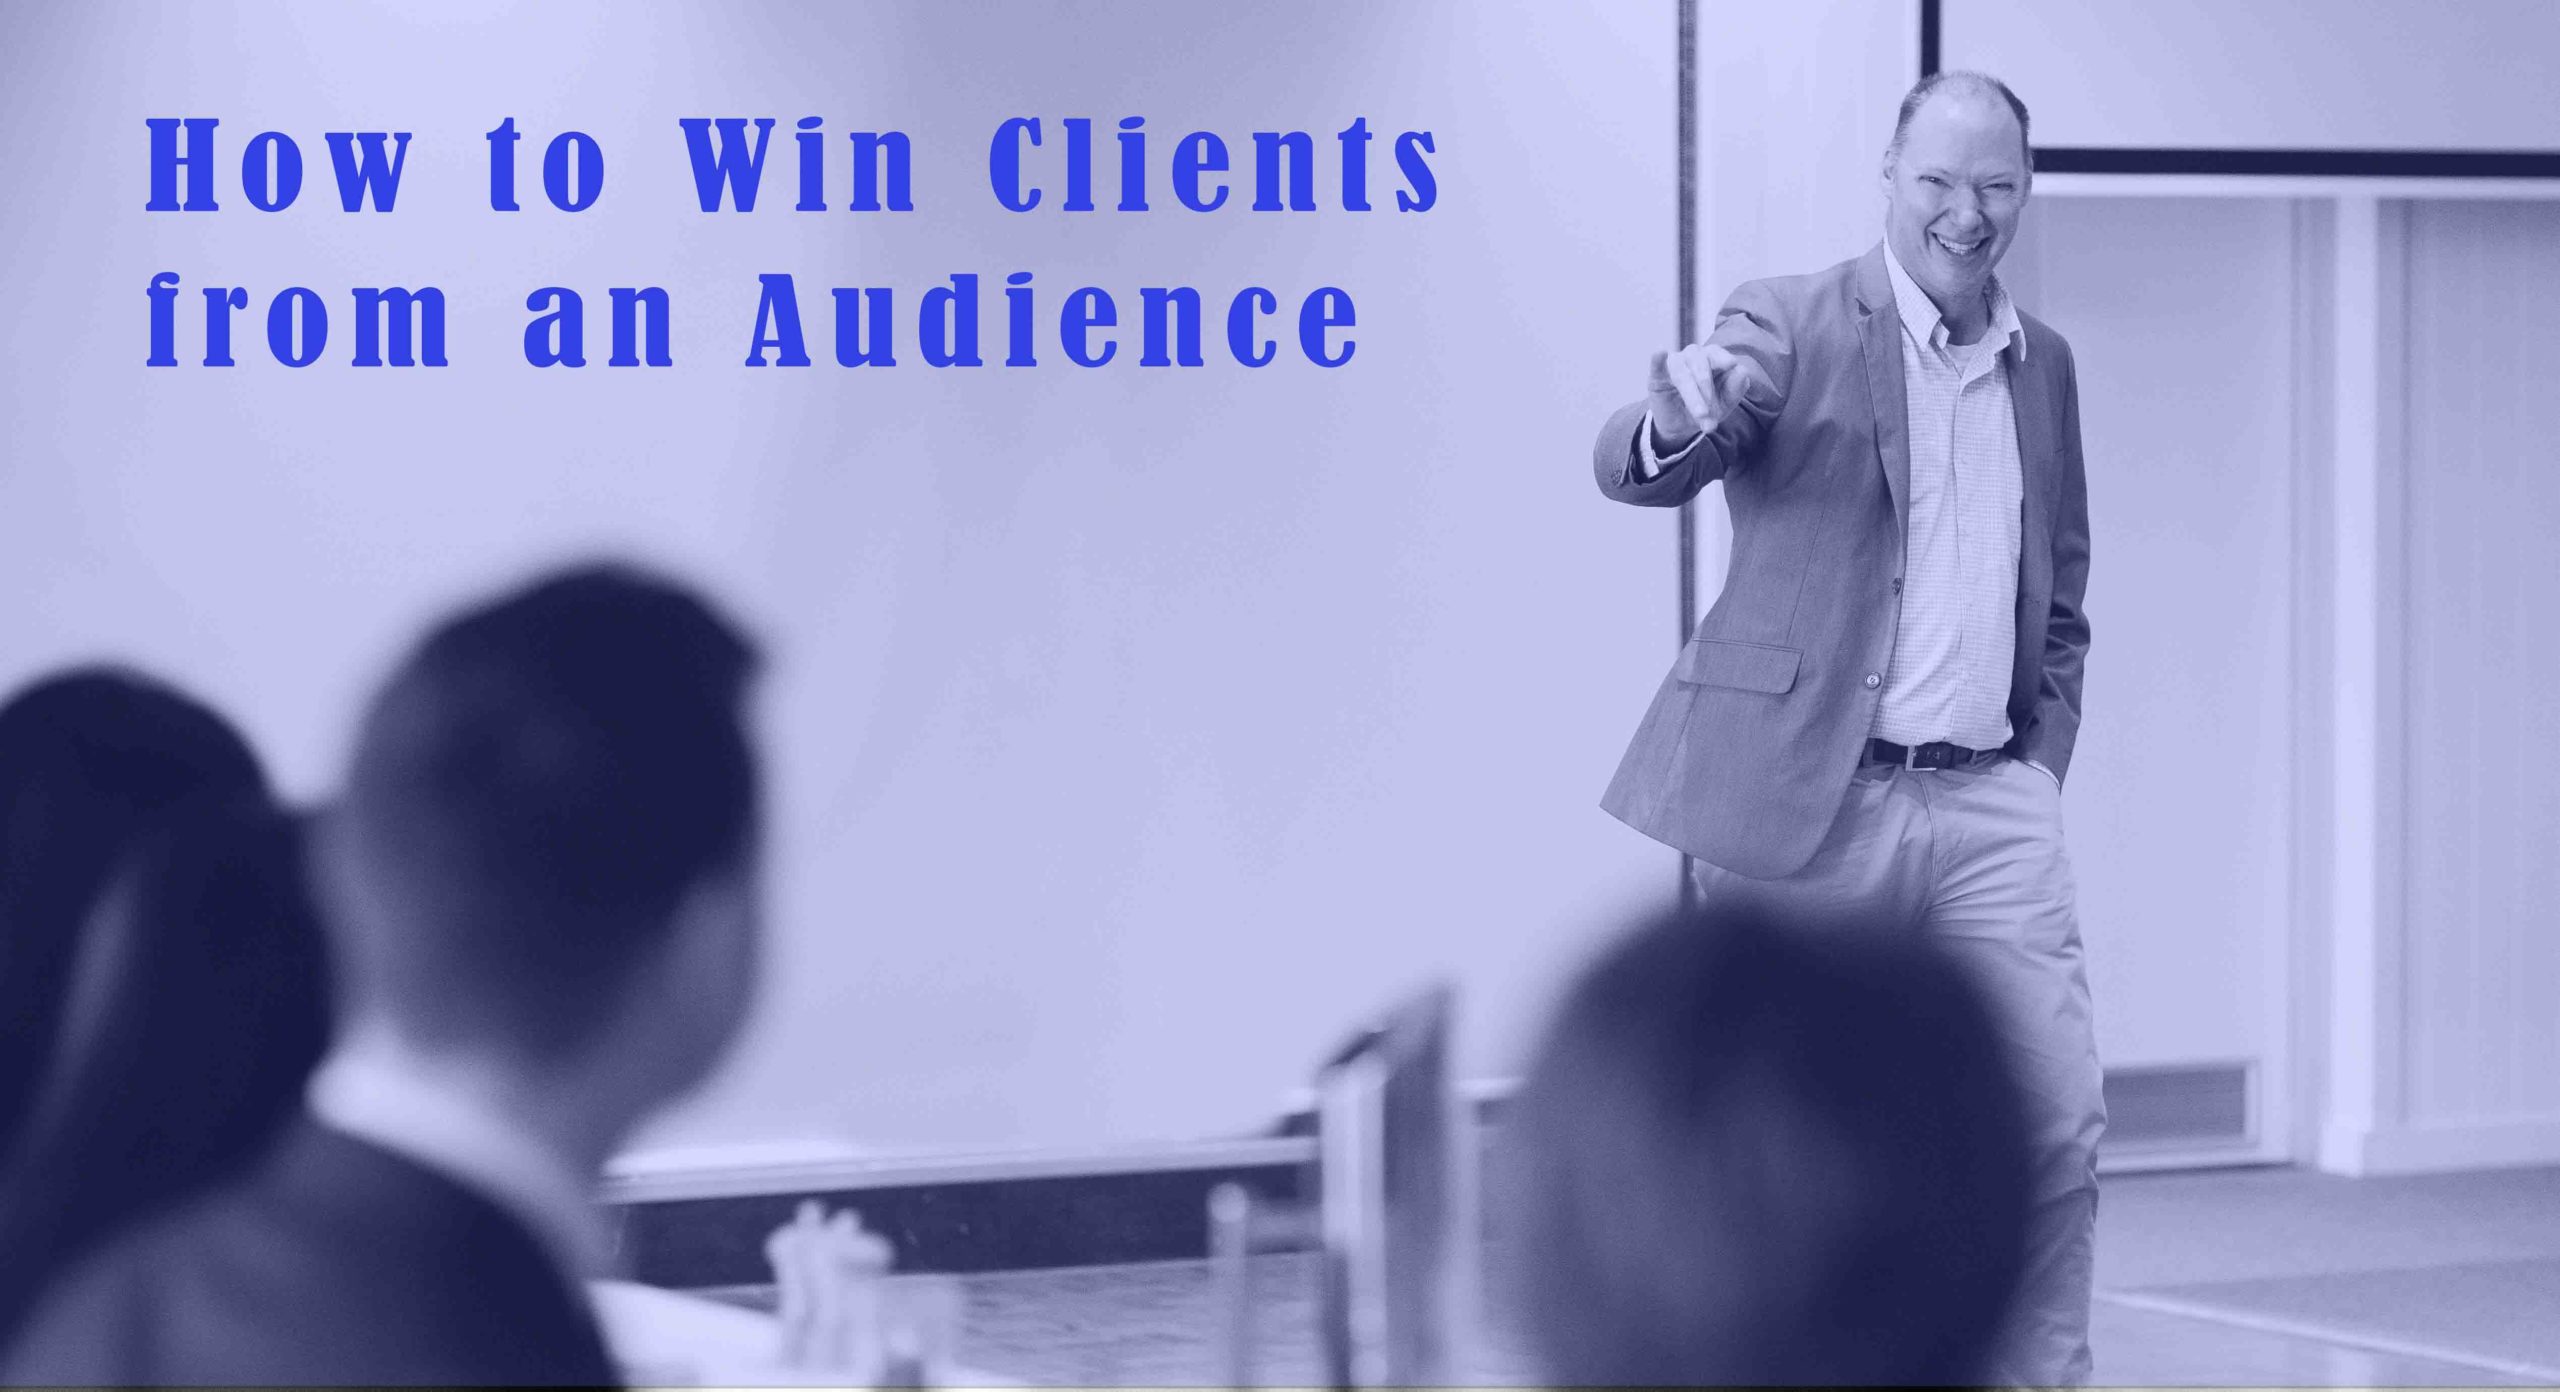 How to Win Clients from an Audience